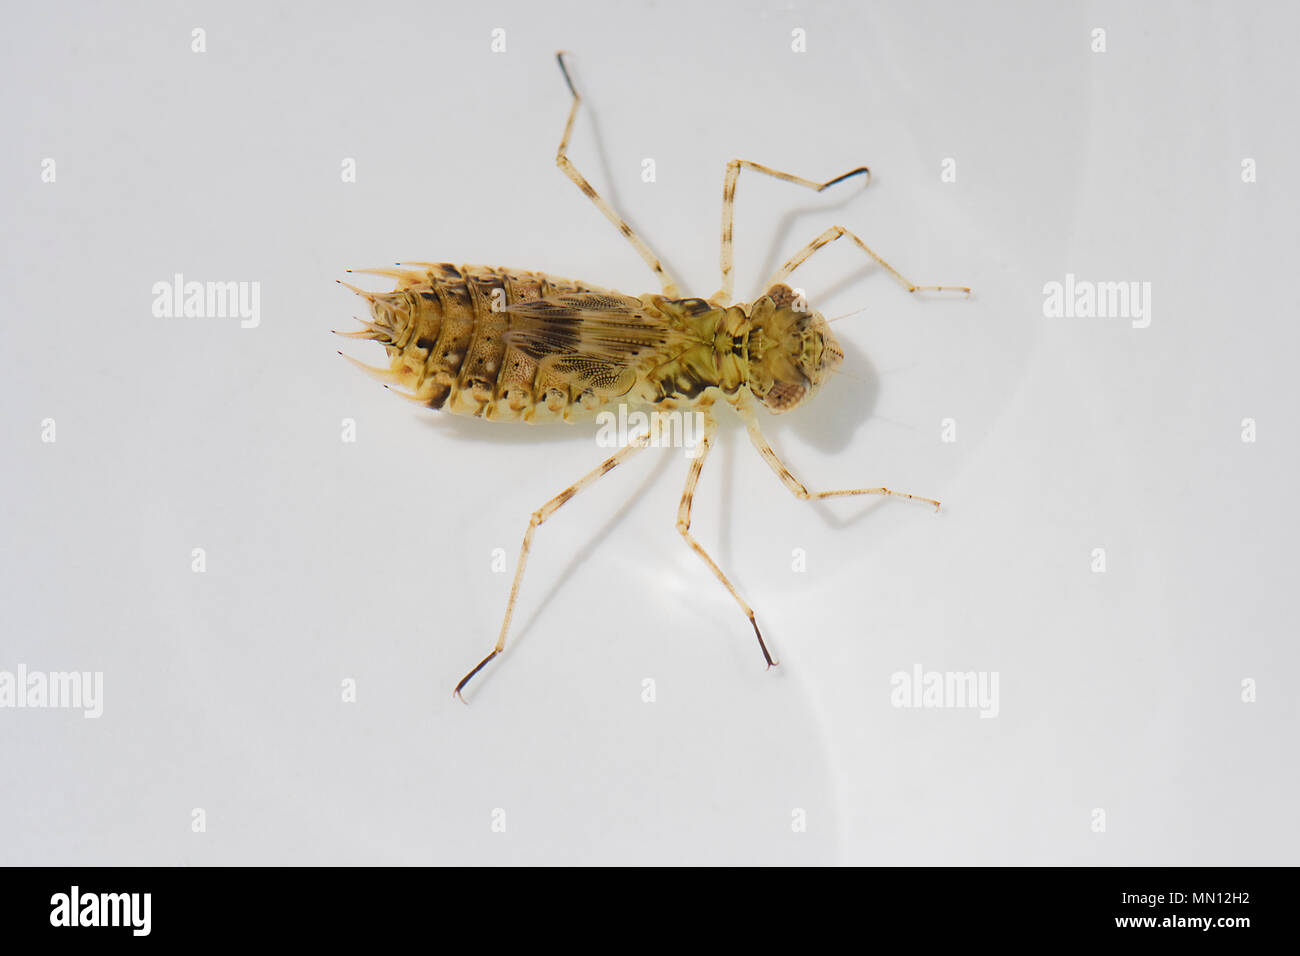 Dragonfly larvae found swimming in water, Cairns, Far North Queensland, FNQ, QLD, Australia Stock Photo